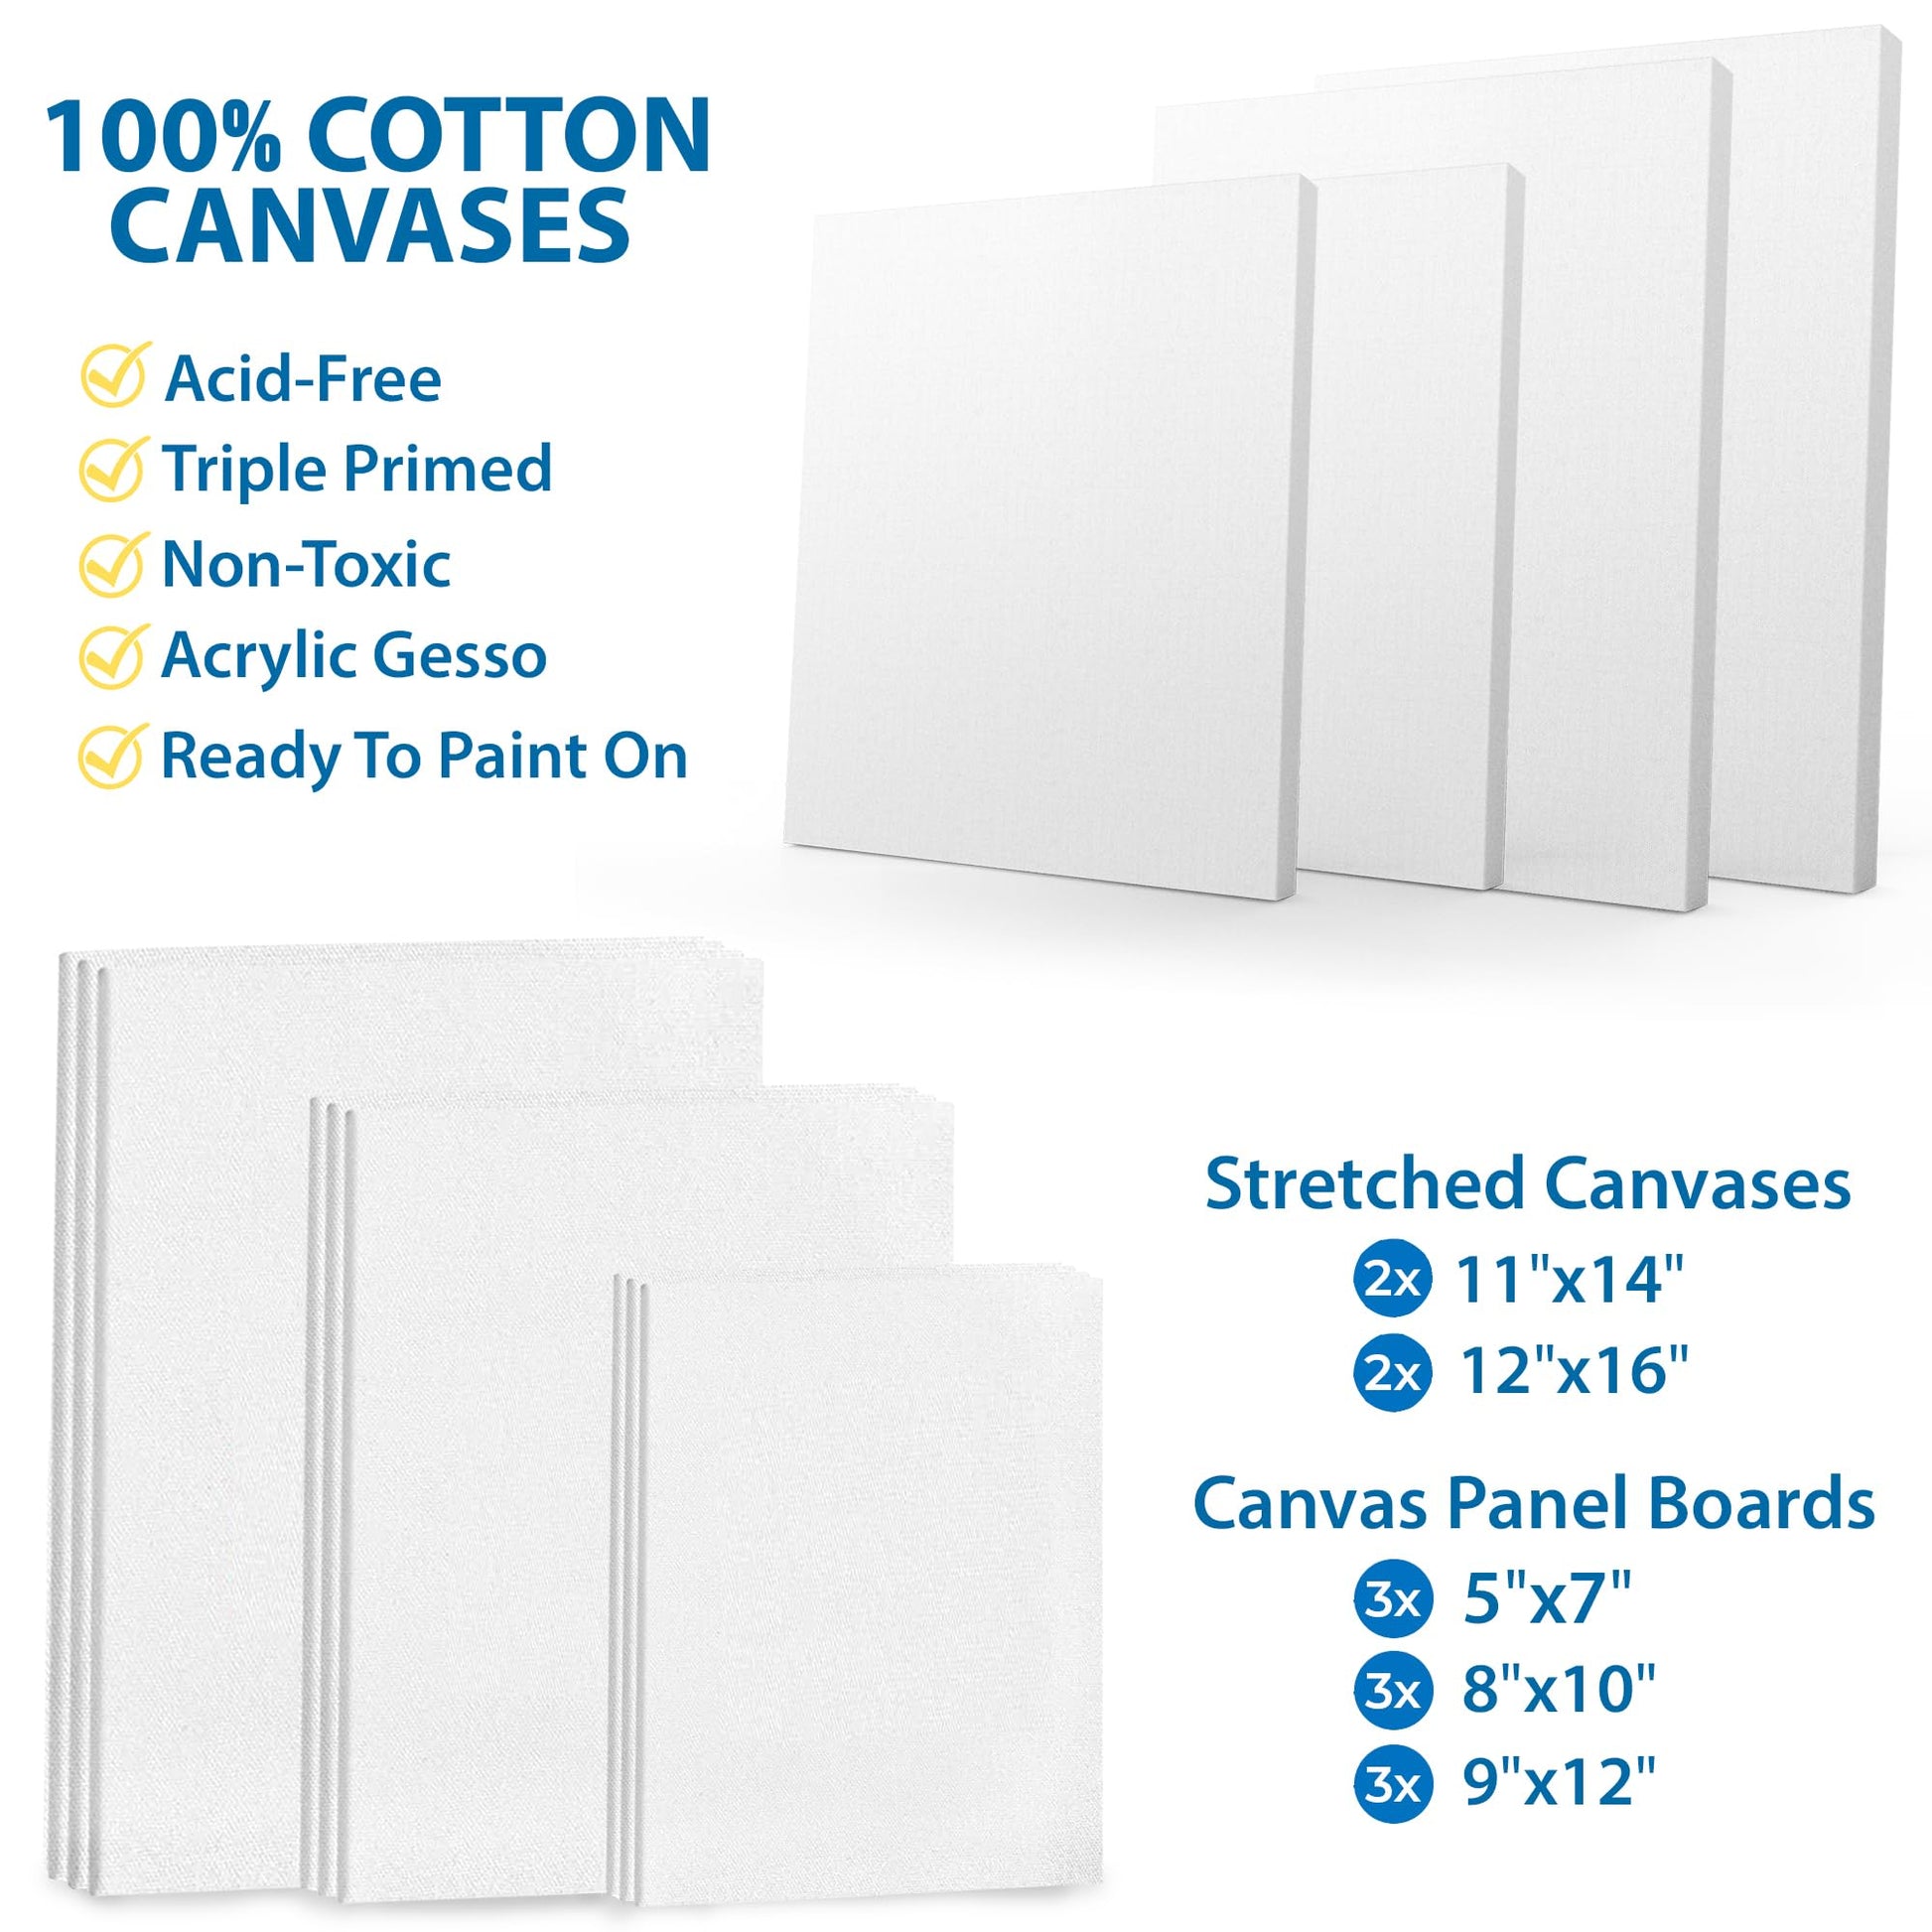 Keff Canvases for Painting - 24 Pack Blank Canvas Panels Set Boards for Acrylic Oil Tempera & Watercolor Paint - 100% Cotton Art Painting Supplies